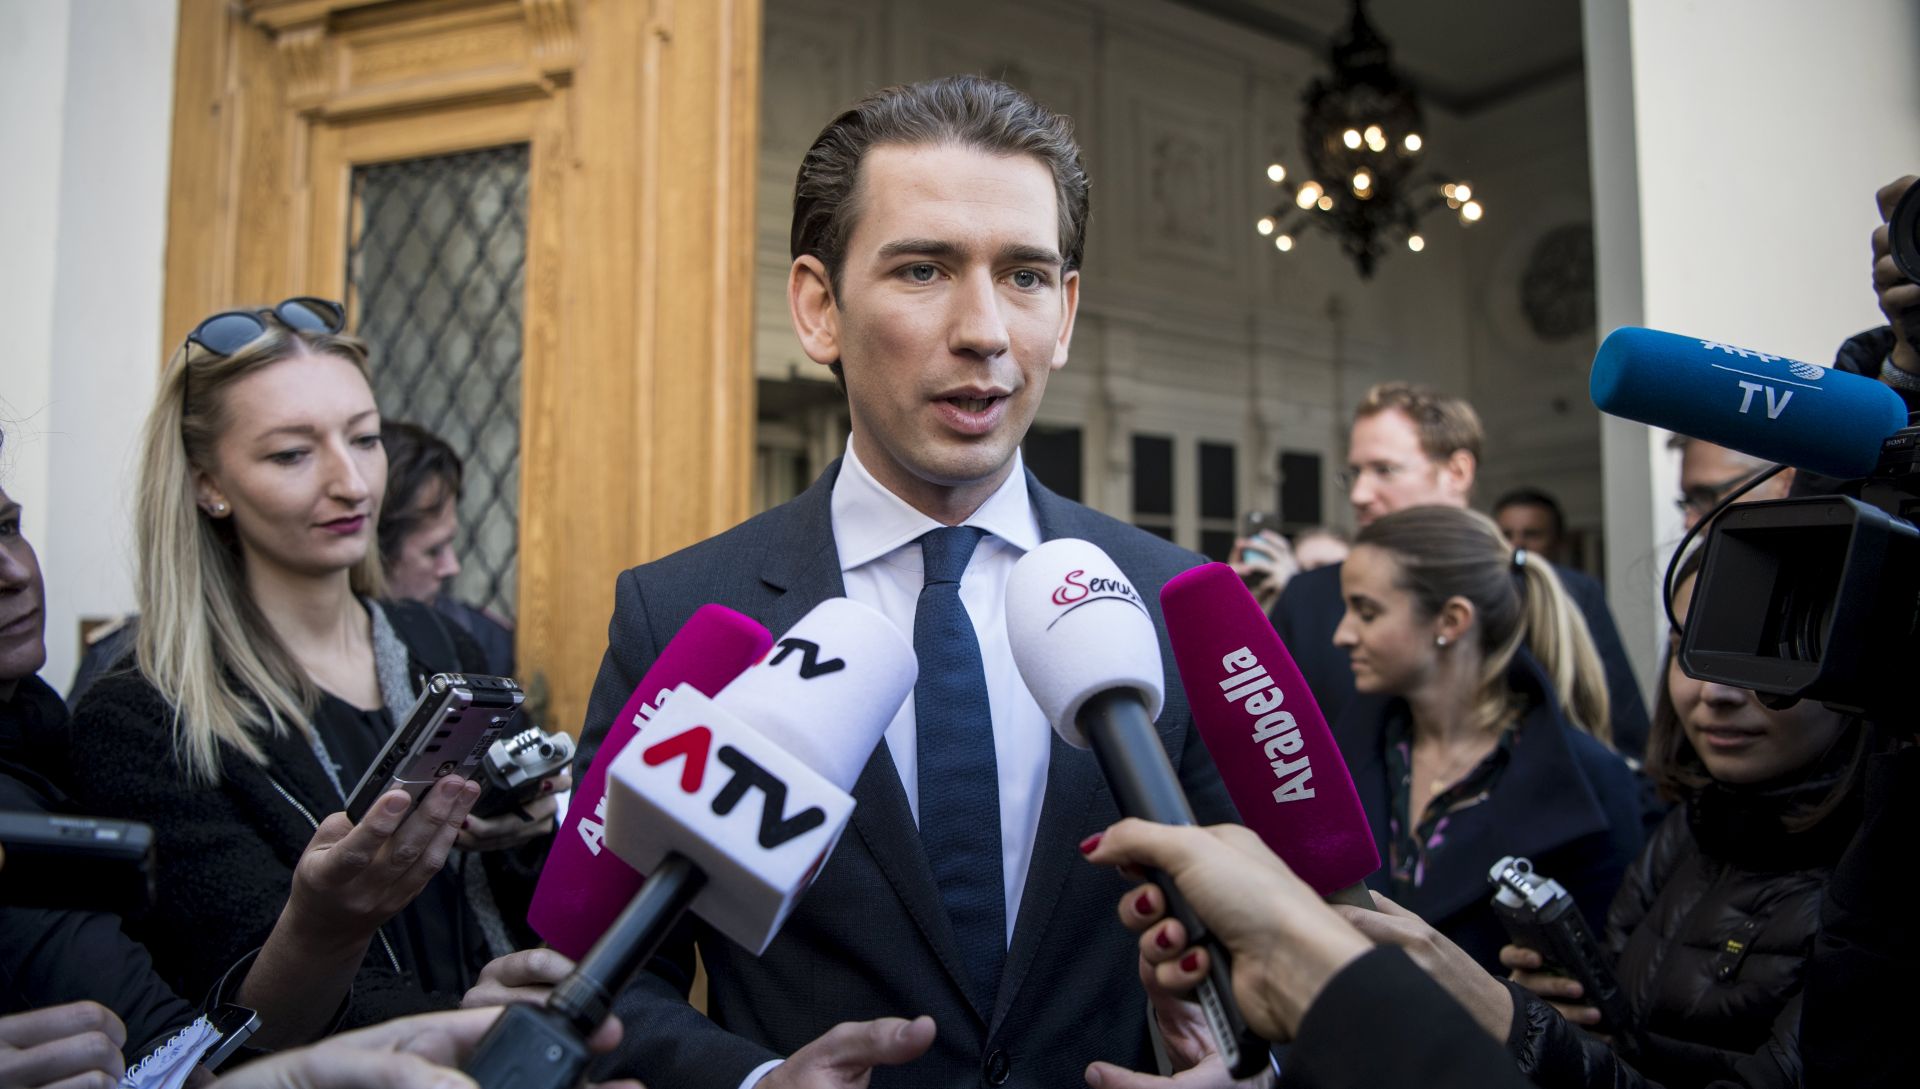 epa06270573 Austrian Foreign Minister Sebastian Kurz, the leader and top candidate of the Austrian Peoples Party (OeVP) addresses the media following the formal resignation of the Austrian government after the Austrian Federal elections in Vienna, Austria, 17 October 2017.  According to preliminary official results, the Austrian Peoples Party (OeVP) won 31.5 percent, the Social Democratic Party (SPOe) 26.9 percent and the right-wing Austrian Freedom Party (FPOe) 26 percent of the vote in the Austrian Federal elections on 15 October 2017.  EPA/CHRISTIAN BRUNA